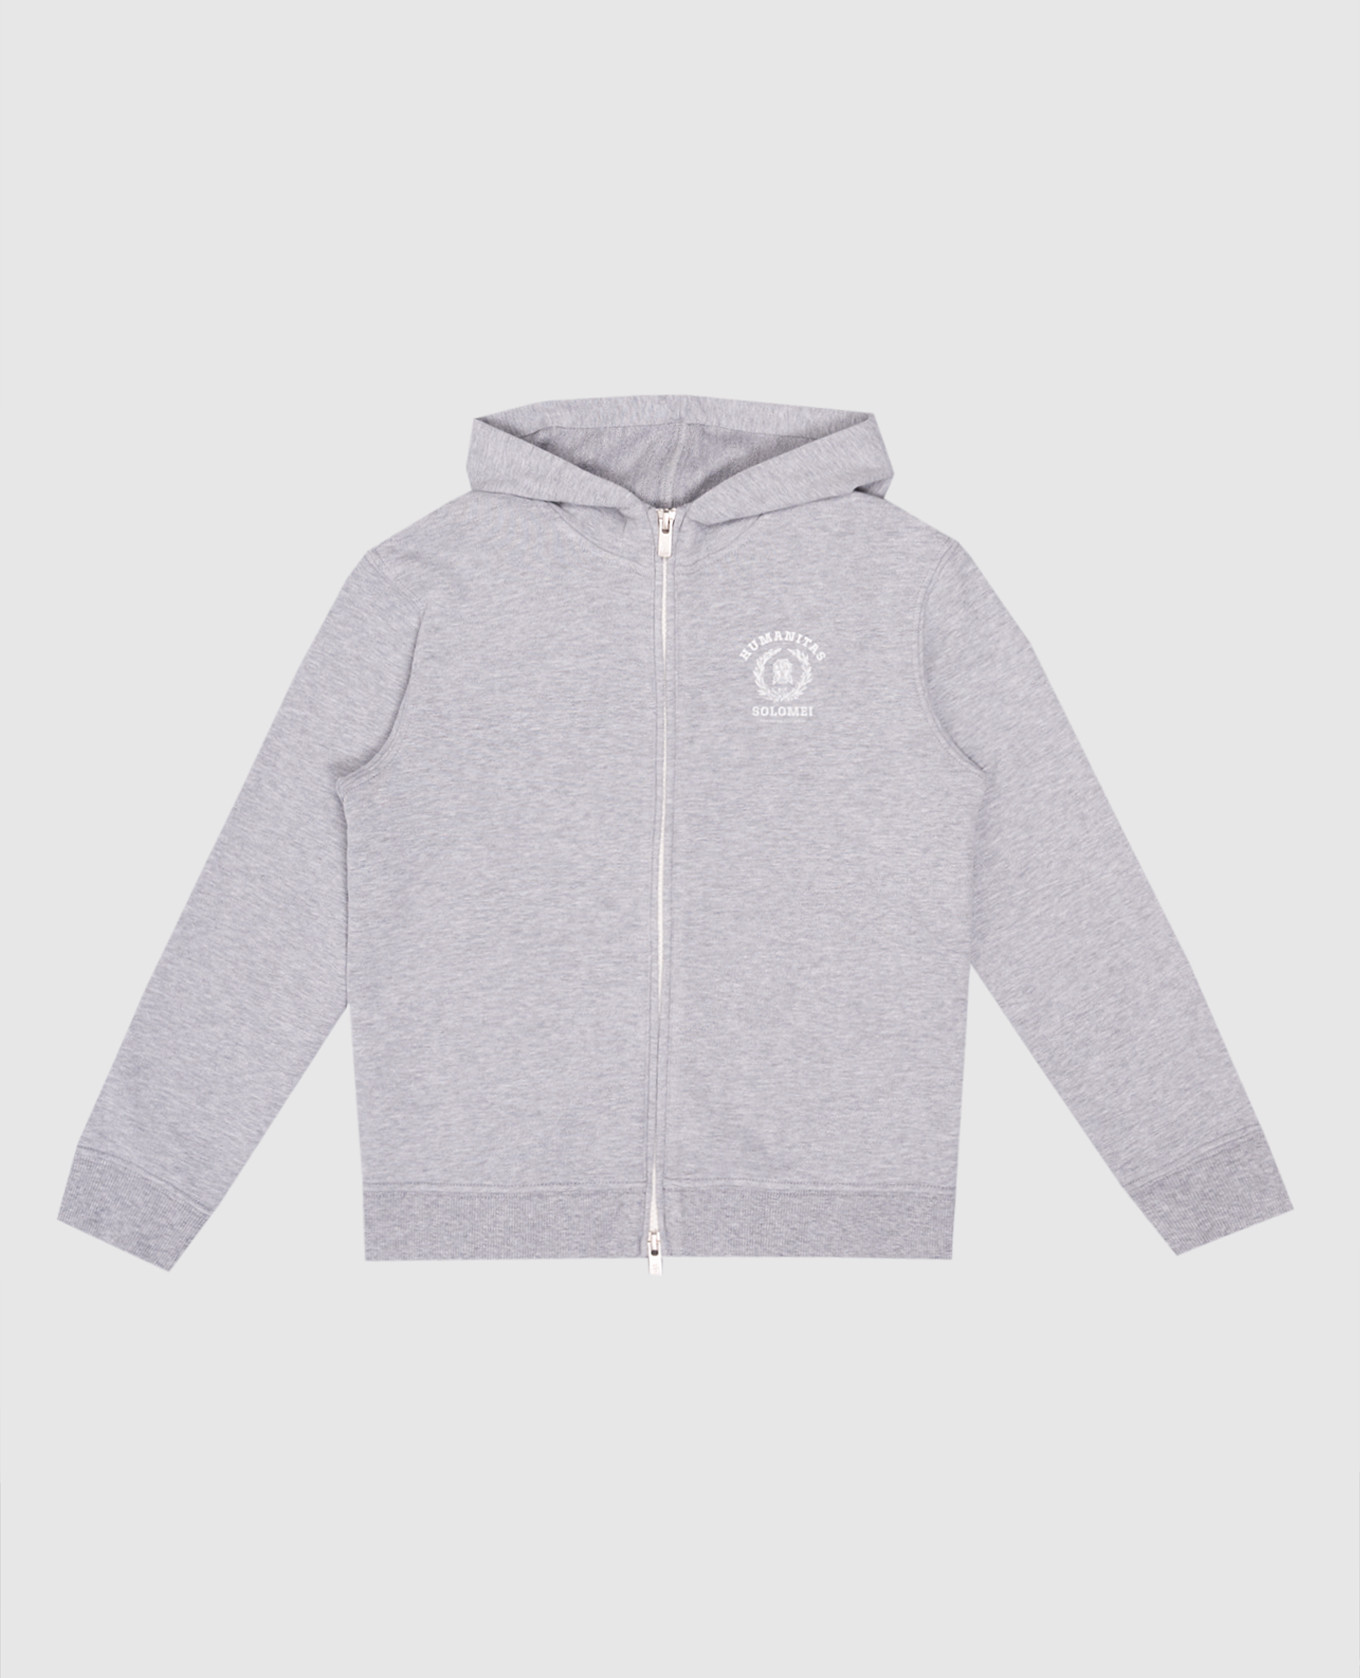 Gray sports jacket with logo embroidery